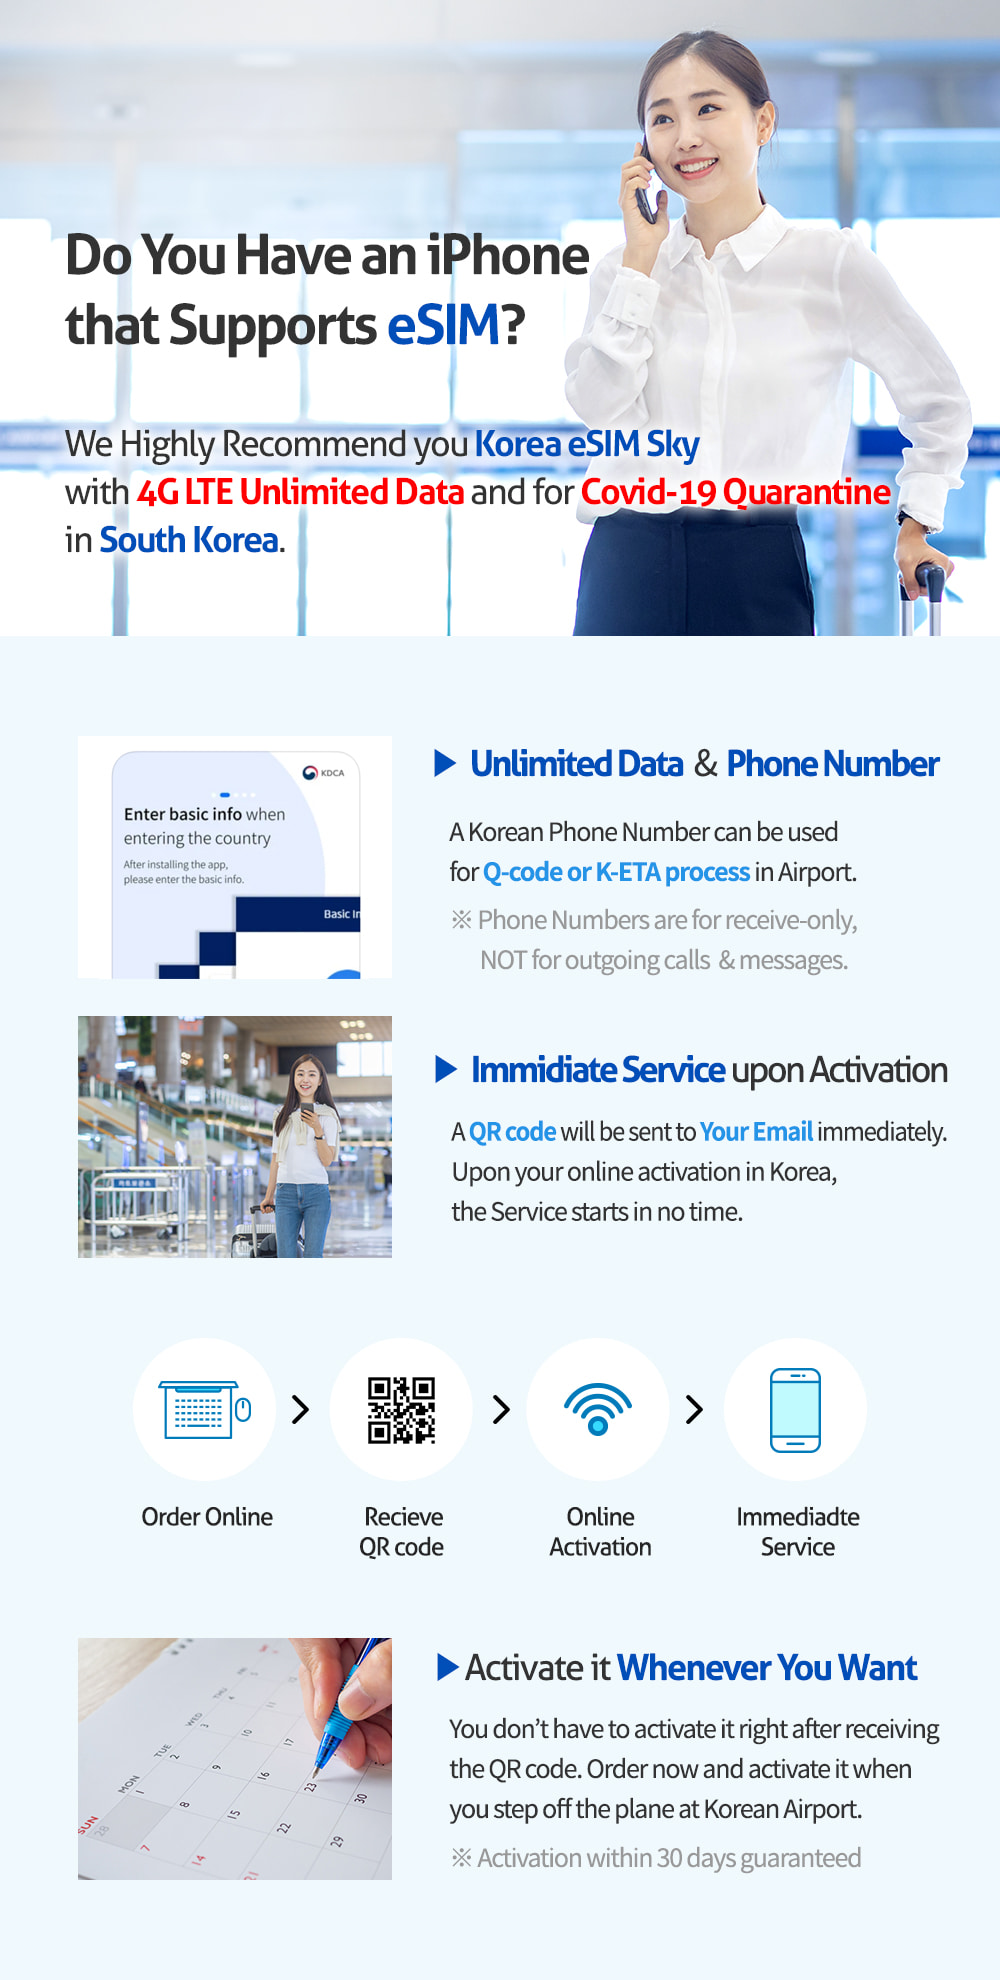 Do You Have an iPhone that Supports eSIM? We Highly Recommend you Korea eSIM Sky with 4G LTE Unlimited Data and for Covid-19 Quarantine in South Korea. Unlimited Data & Phone Number. A Koraen Phone Number can be used for Covid-19 Qurantine App. in Airport. Phone Numbers are for receive-only, NOT for outgoing calls & messages. Immidiate Service upon Activation. A QR code will be sent to Your Email. Upon your online activation, the Service starts with no time. Activate it Whenever You Want. You don`t have to activate it right after receiving the QR code. Order now and activate it when you step off the plane at Korean Airport. Activation within 30 days guaranteed.